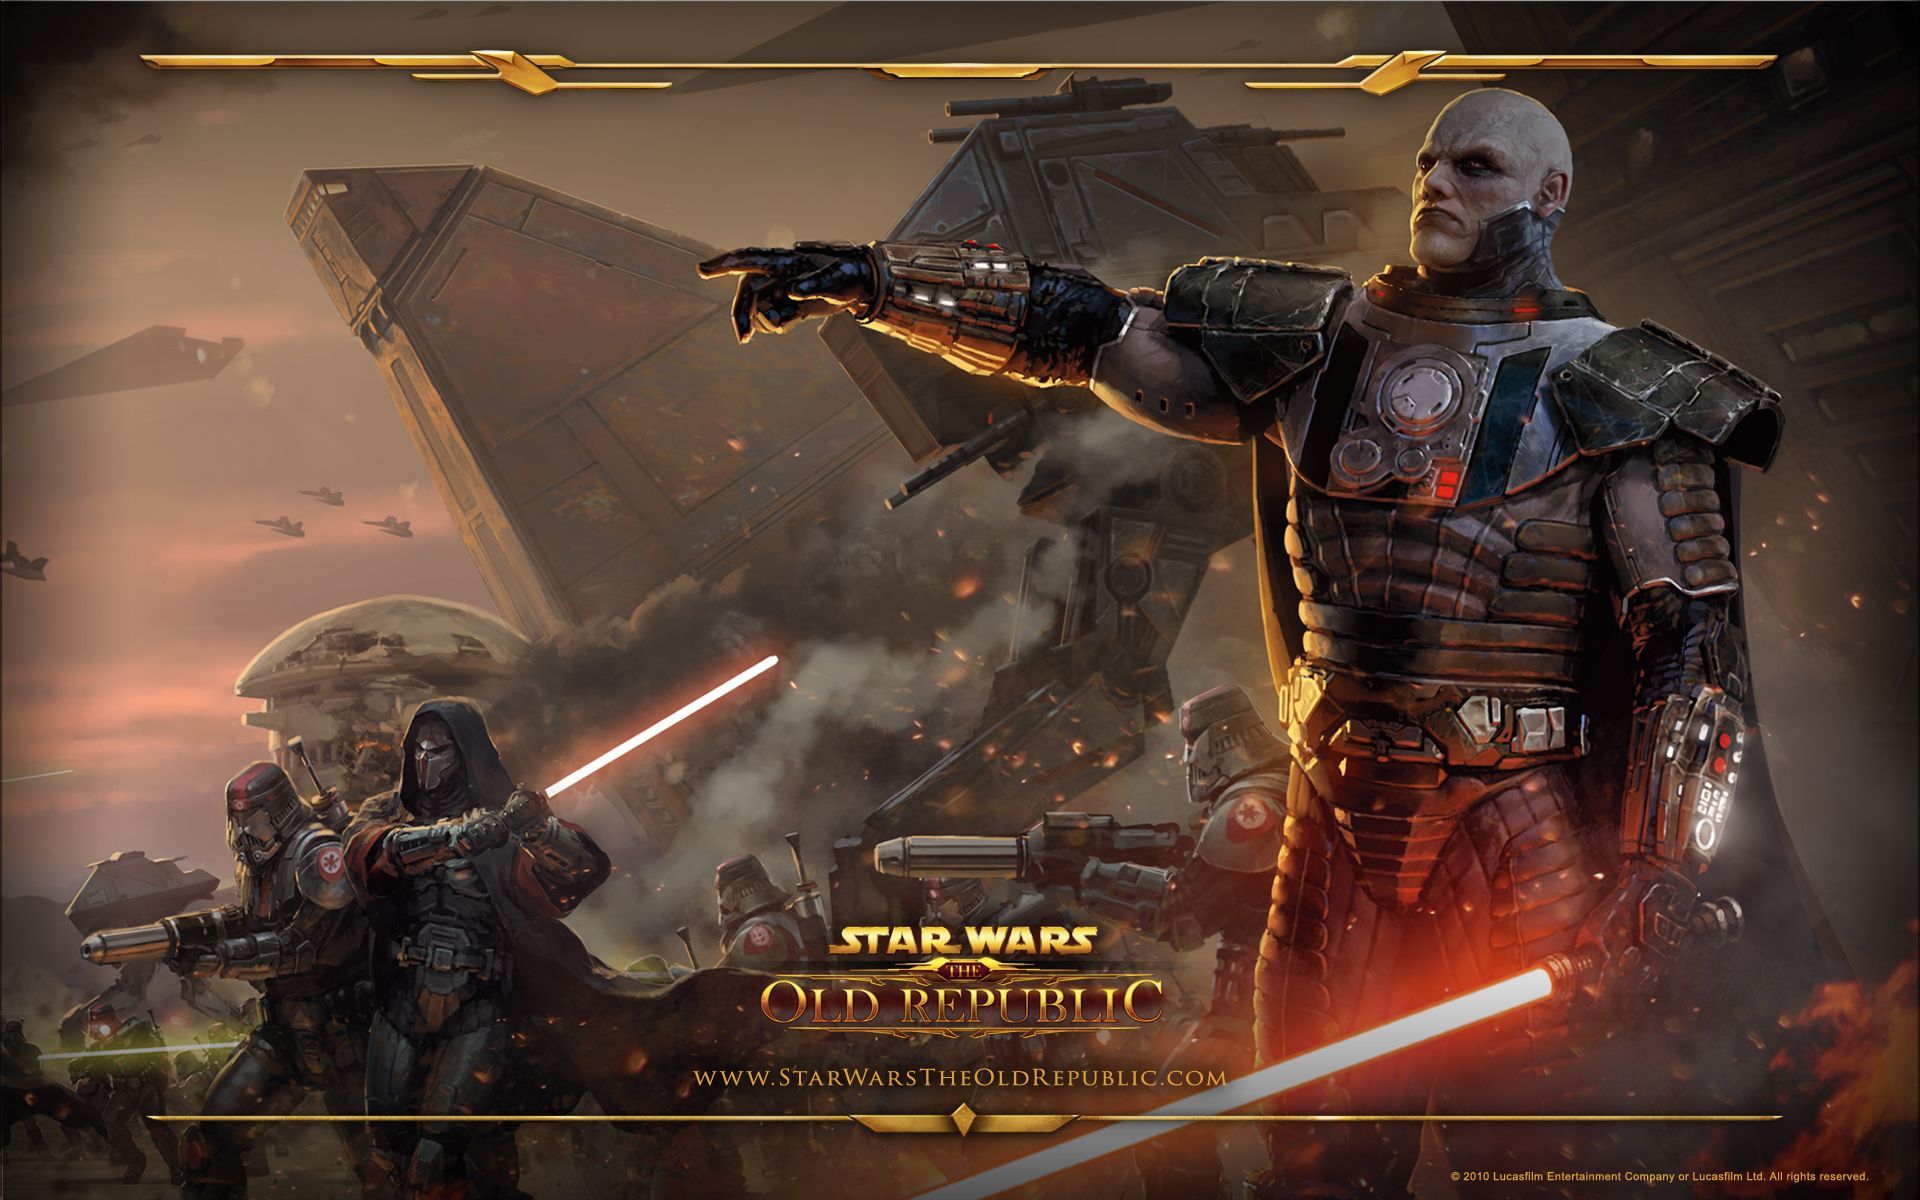 Star Wars the Old Republic HD wallpapers - Abbreviated as TOR or SWTOR